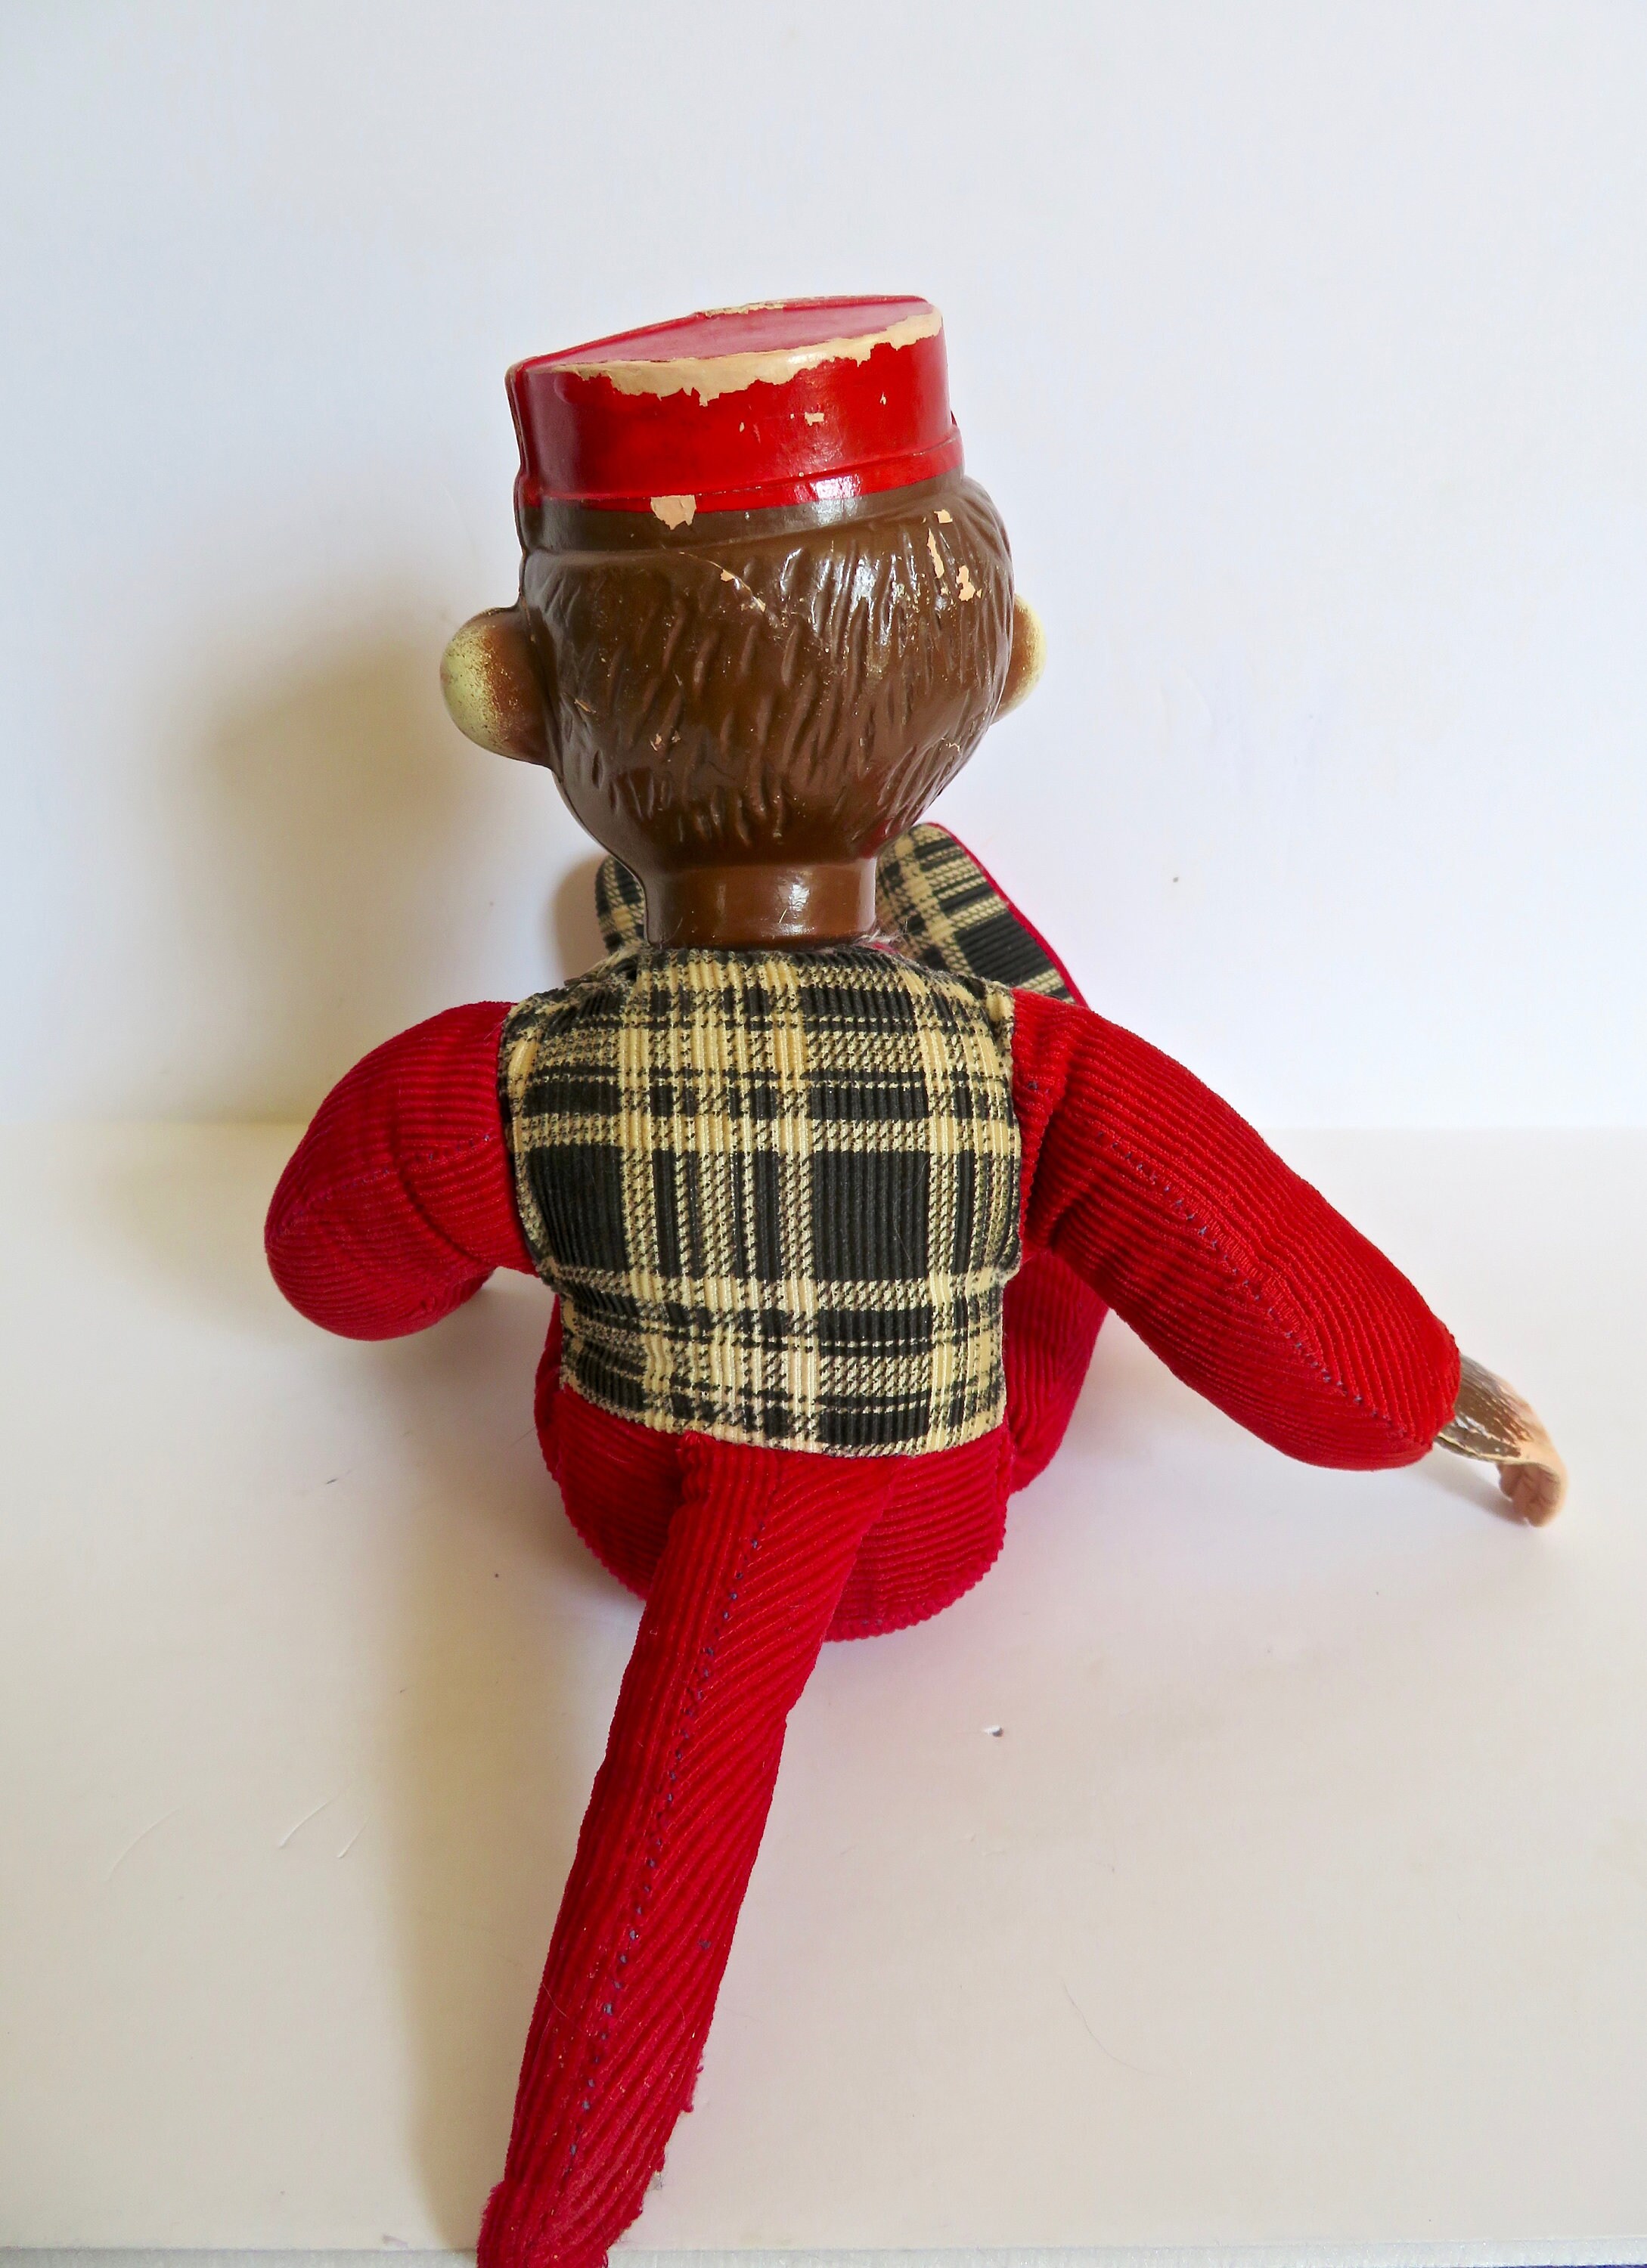 Vintage 30s 40s Bellhop Monkey Toy in Corduroy with Celluloid Plastic Face Soft Body Vintage Buttons Organ Grinder Stuffed Animal Plush